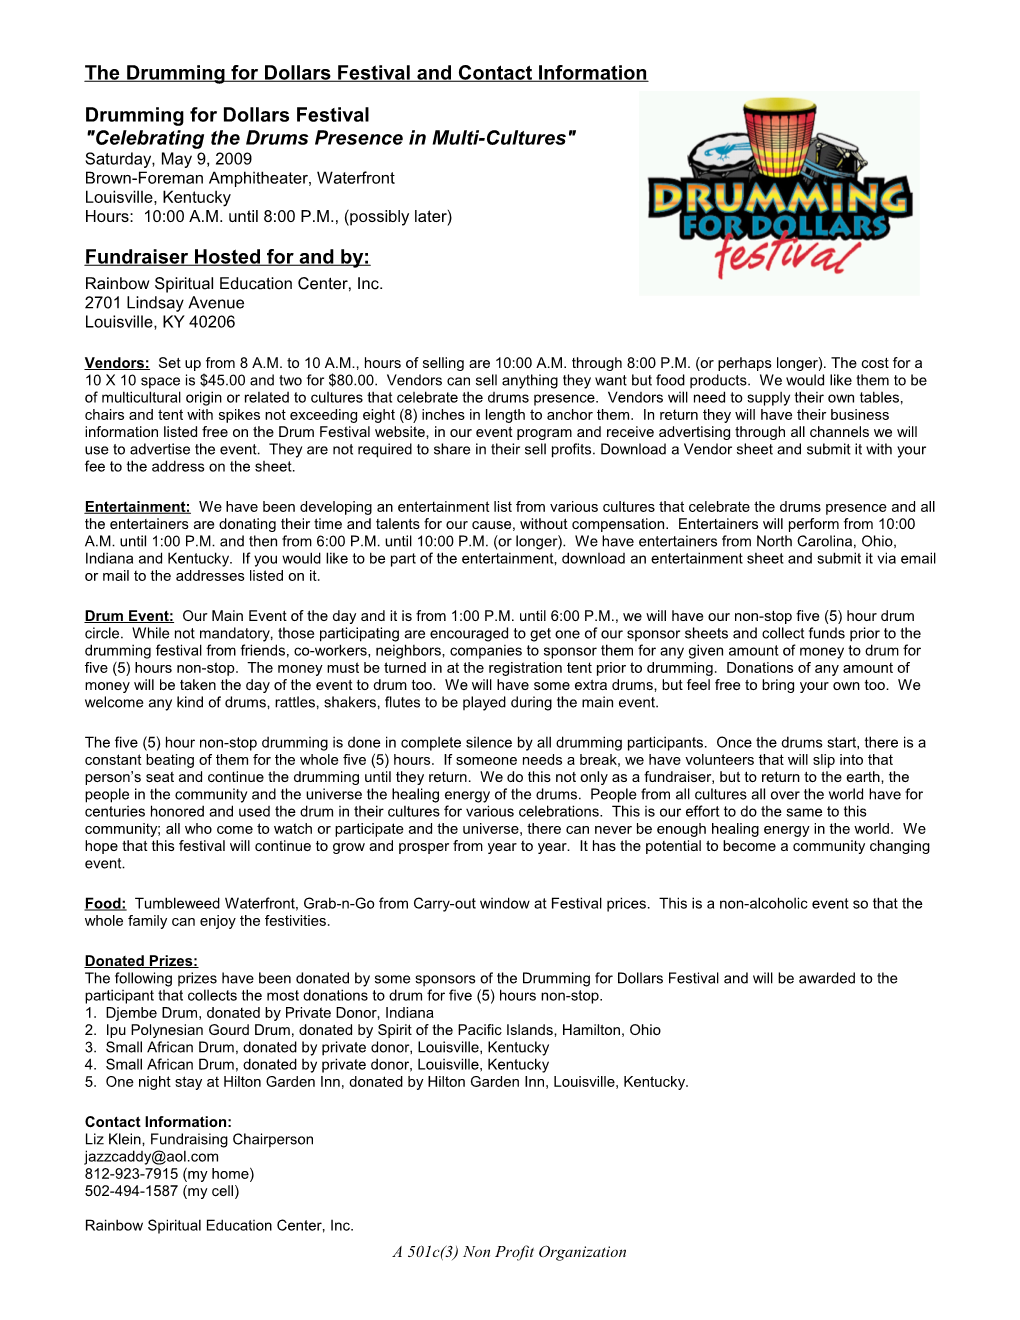 The Drumming for Dollars Festival and Contact Information